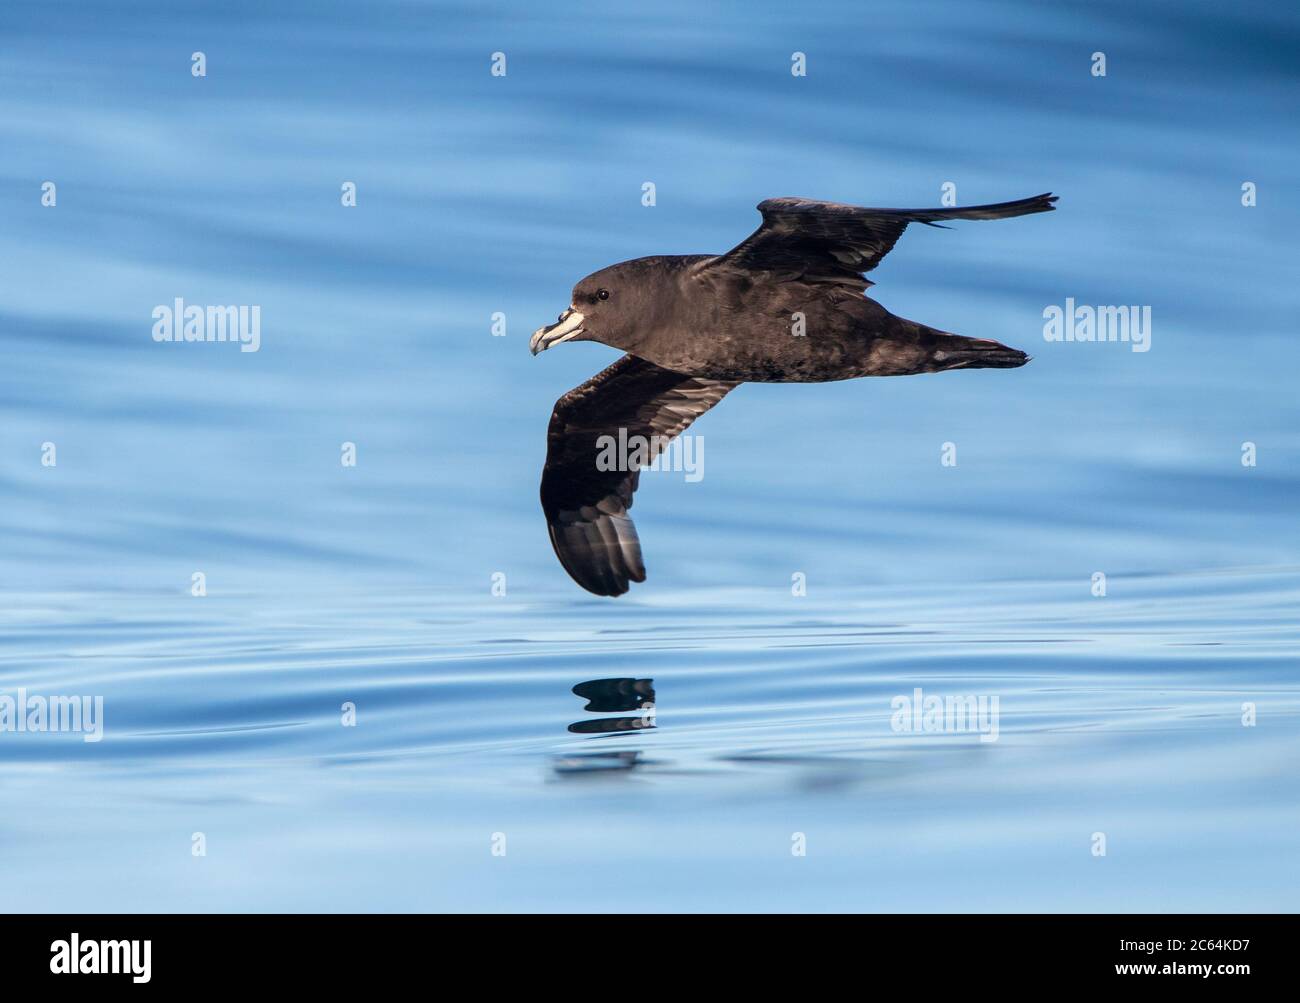 Westland Petrel (Procellaria westlandica) at sea in southern pacific ocean off Kaikoura in New Zealand. Gliding low over the sea surface. Stock Photo